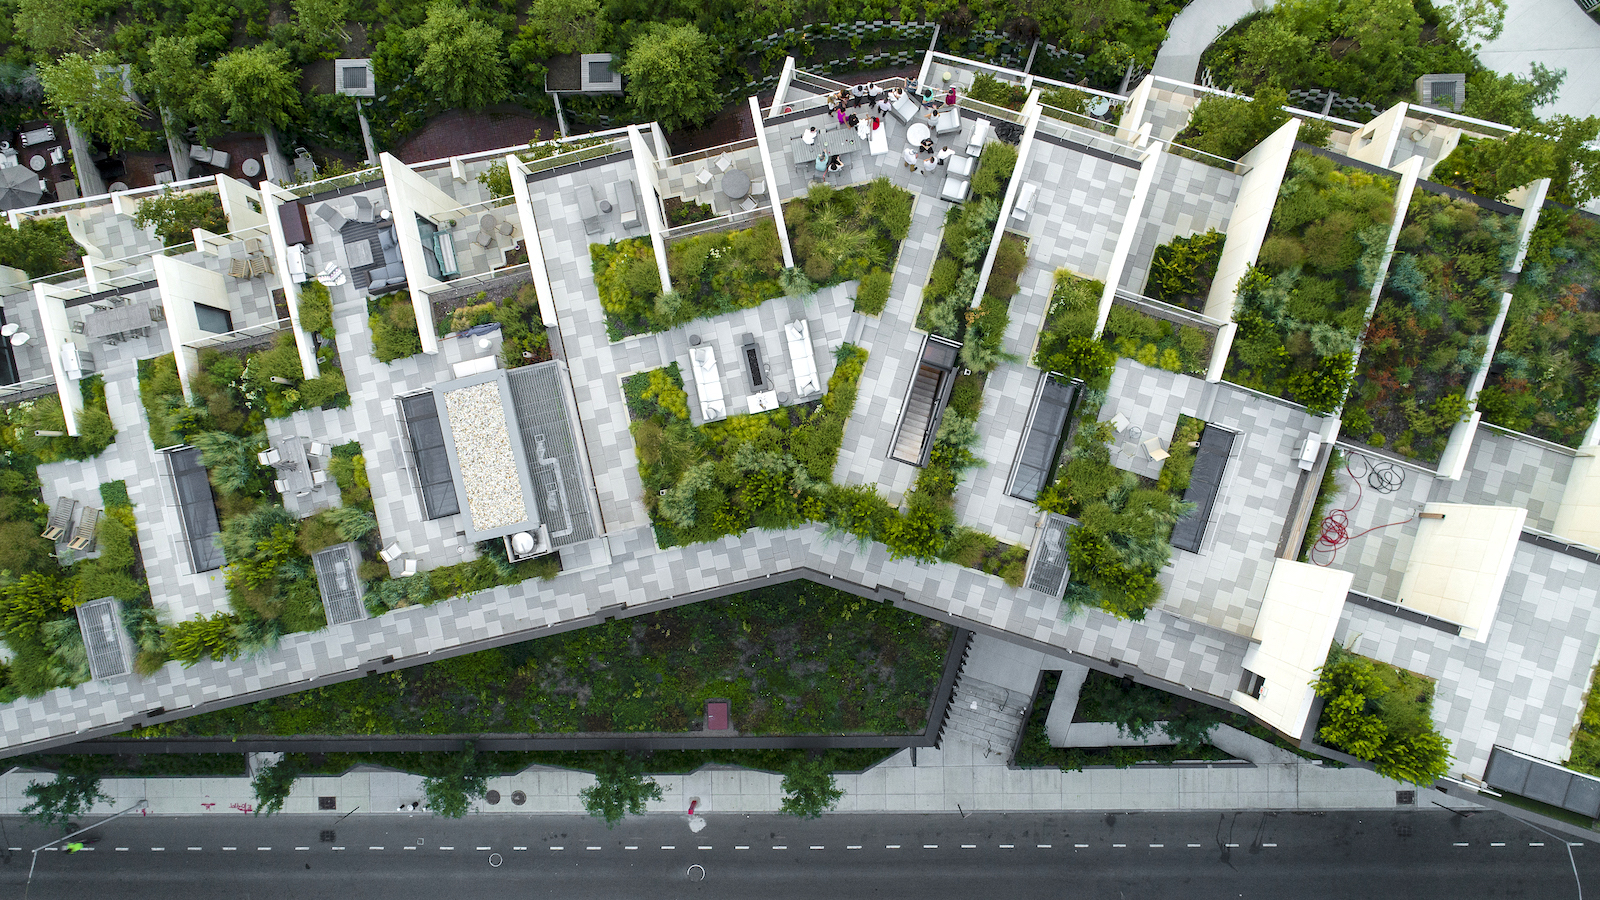 New York City Greenery Absorbing All Traffic Emissions on Many Summer Days  - Yale E360